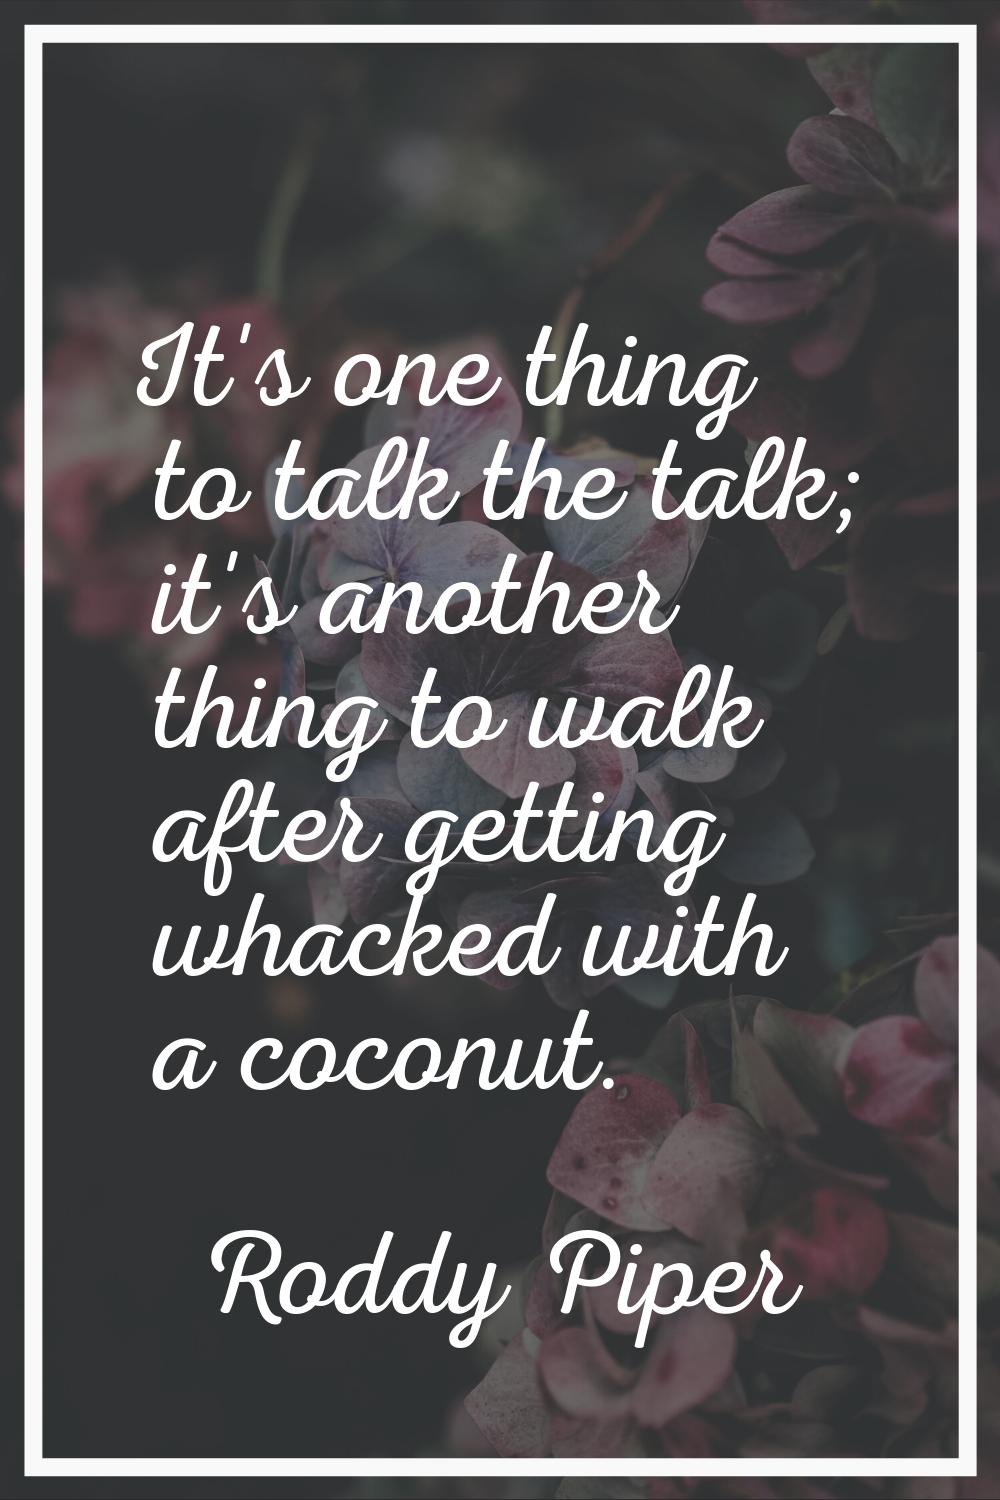 It's one thing to talk the talk; it's another thing to walk after getting whacked with a coconut.